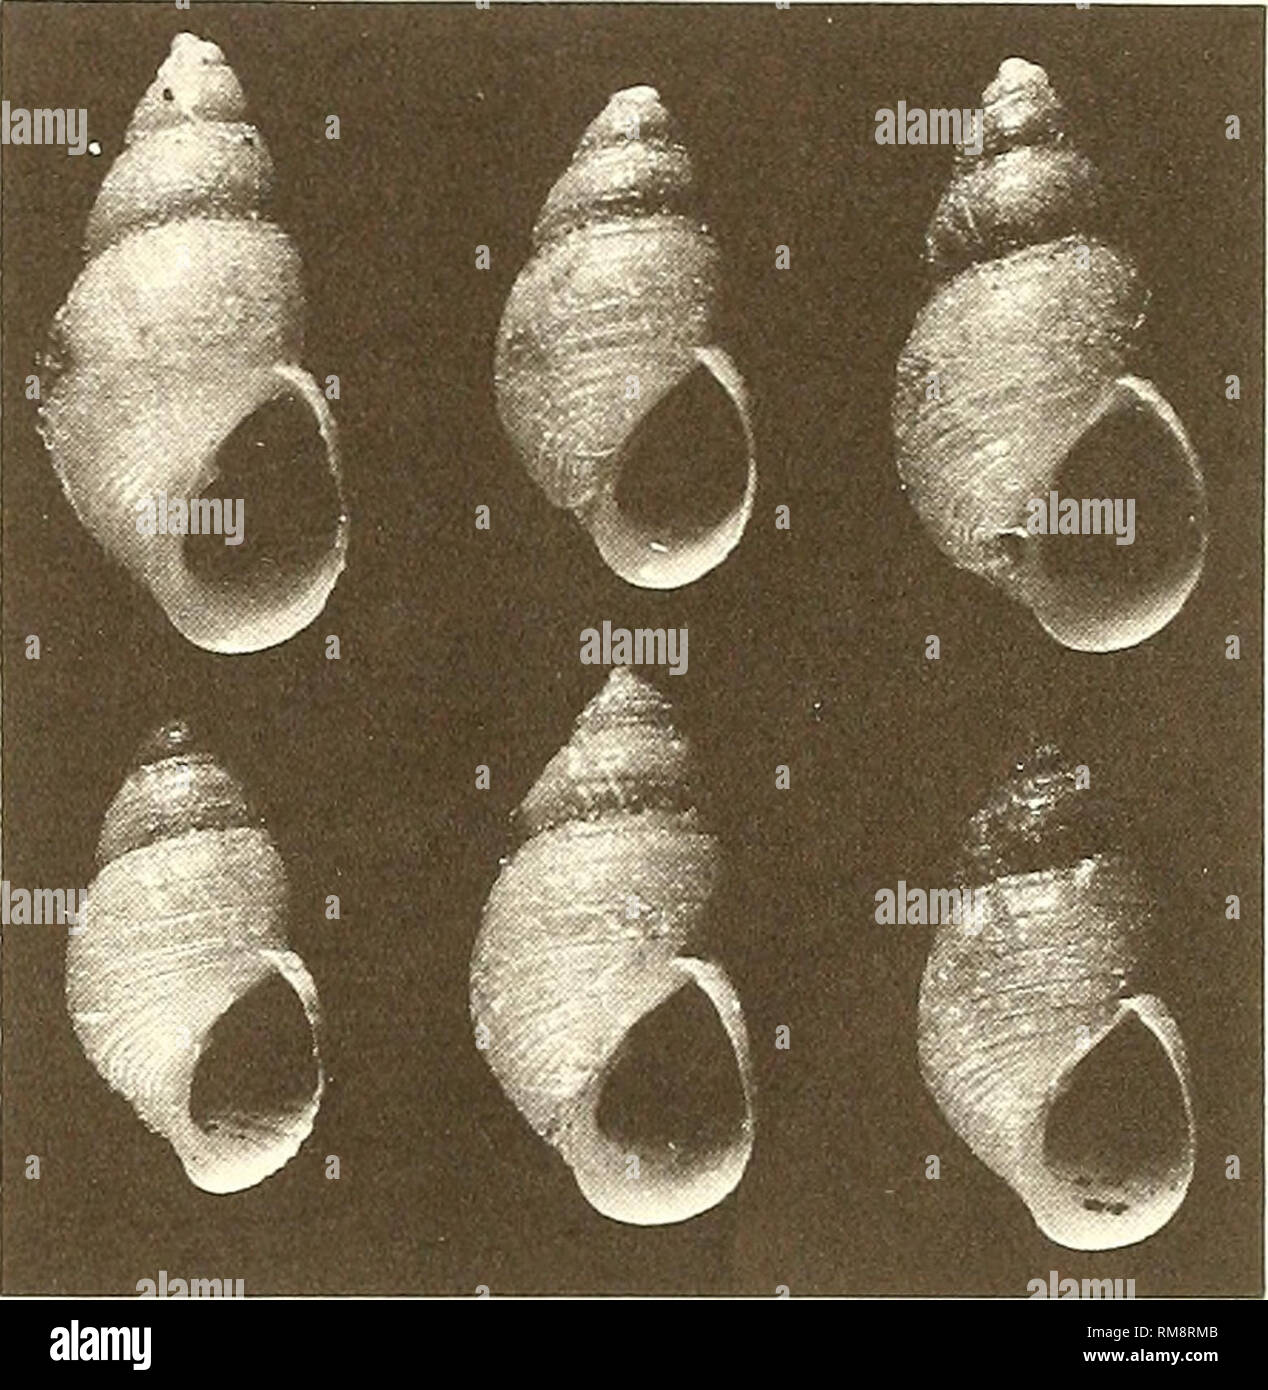 . Annual report - Western Society of Malacologists. Mollusks; Mollusks. the effect of inbreeding and distinguishes two cate- gories in which inbreeding occurs. The first are parasites that infest the nests of their hosts, reproducing in the nest and returning frequentiy to the host to feed. Of these, he states &quot;Many thoroughly inbred lines may result in any given locality and thus it is possible for the inherent variability of the genetic pattern to become apparent in the same area, just as it is possible to select or breed out many different strains of organisms by inbreeding.&quot; Spec Stock Photo